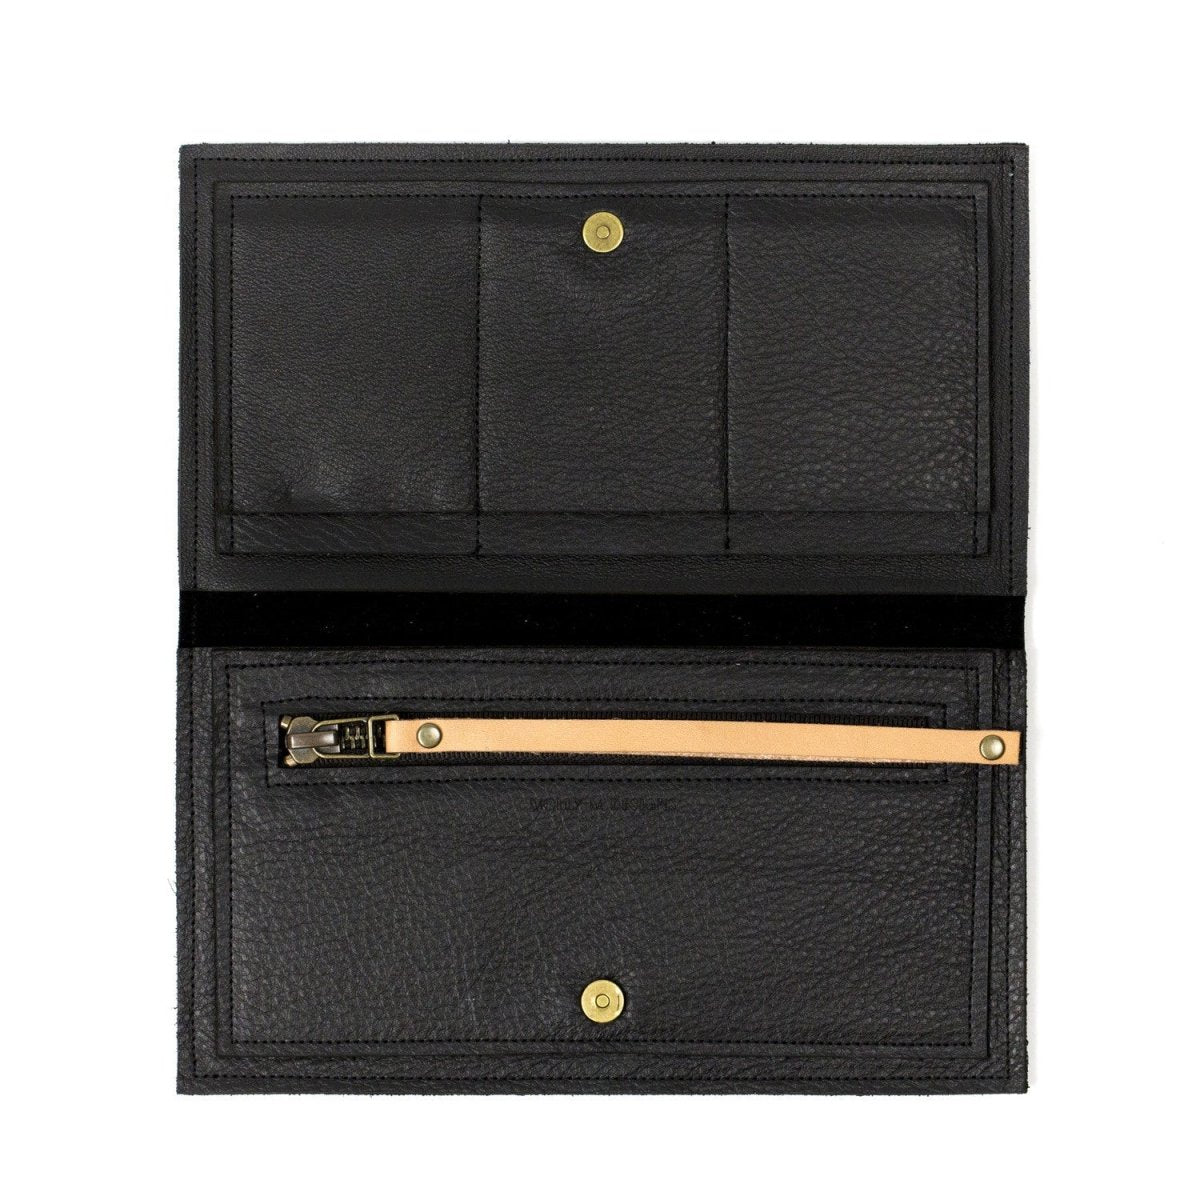 Molly M Leather Pouch Wristlet in matte black